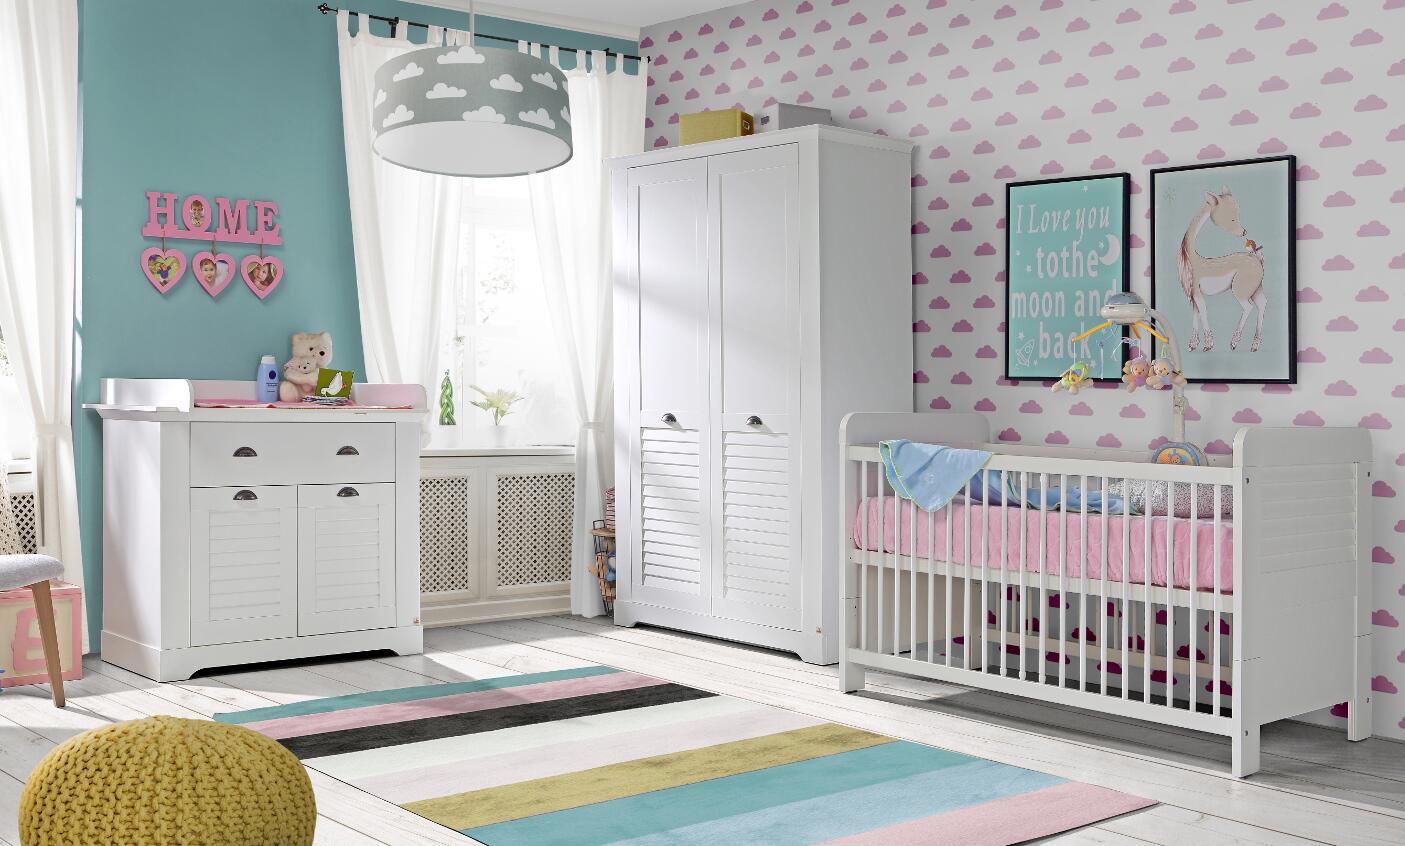 The visualisation shows a children's room, a chest of drawers with a changing table, a wardrobe and a cot.